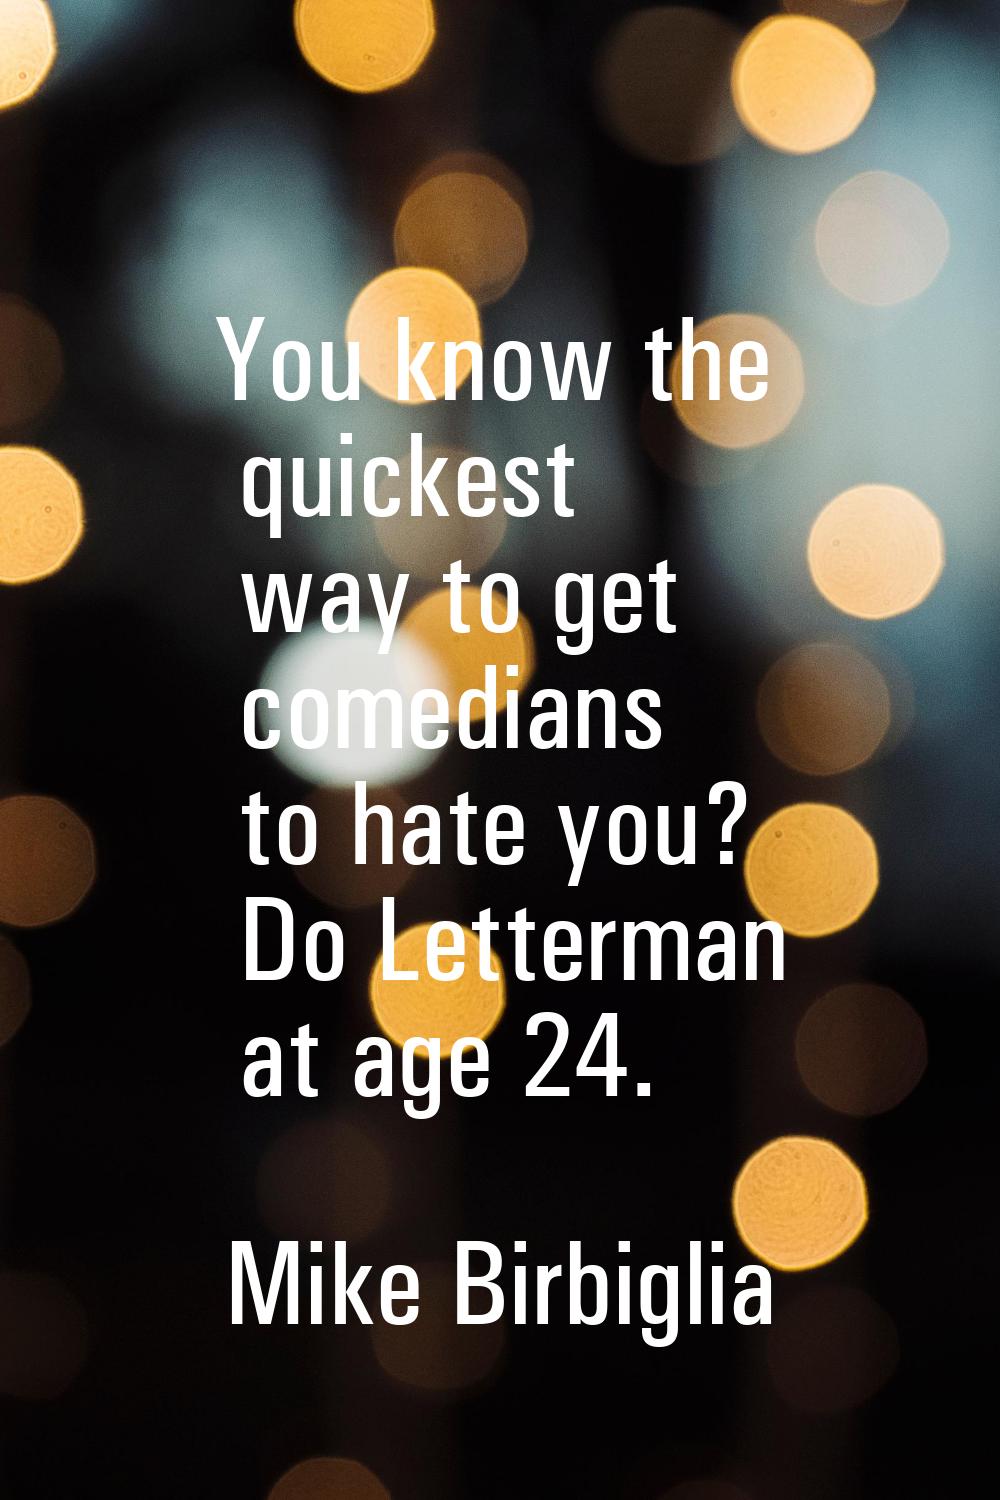 You know the quickest way to get comedians to hate you? Do Letterman at age 24.